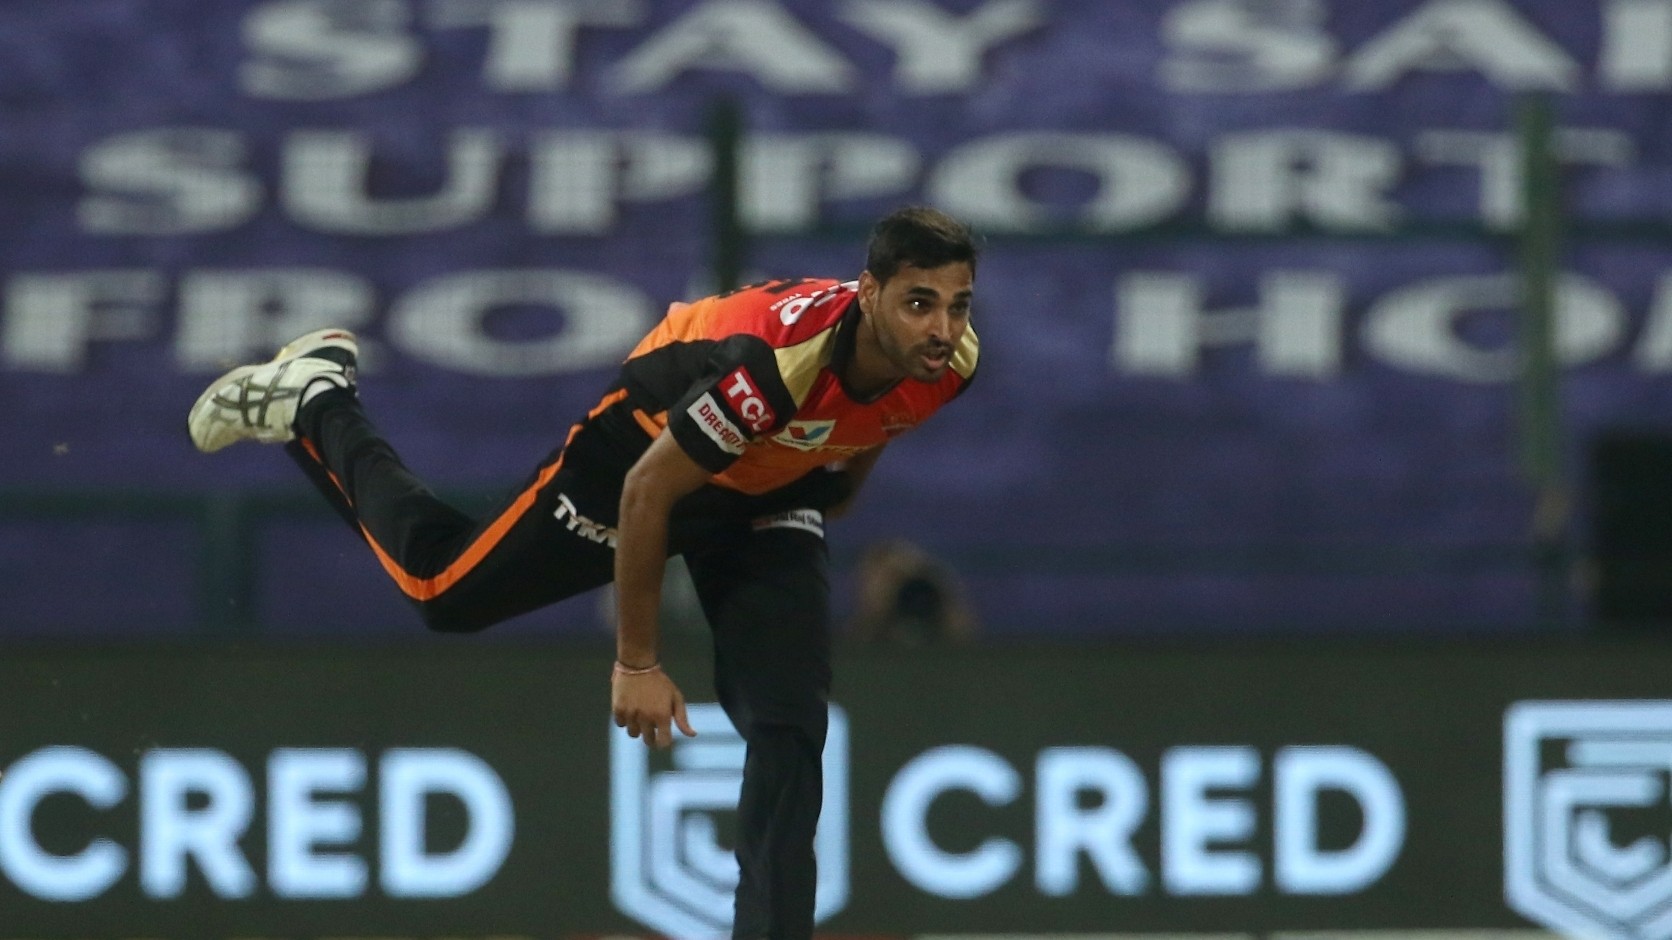 IPL 2020: SRH to miss Bhuvneshwar Kumar for rest of IPL 13 due to hip injury, as per reports